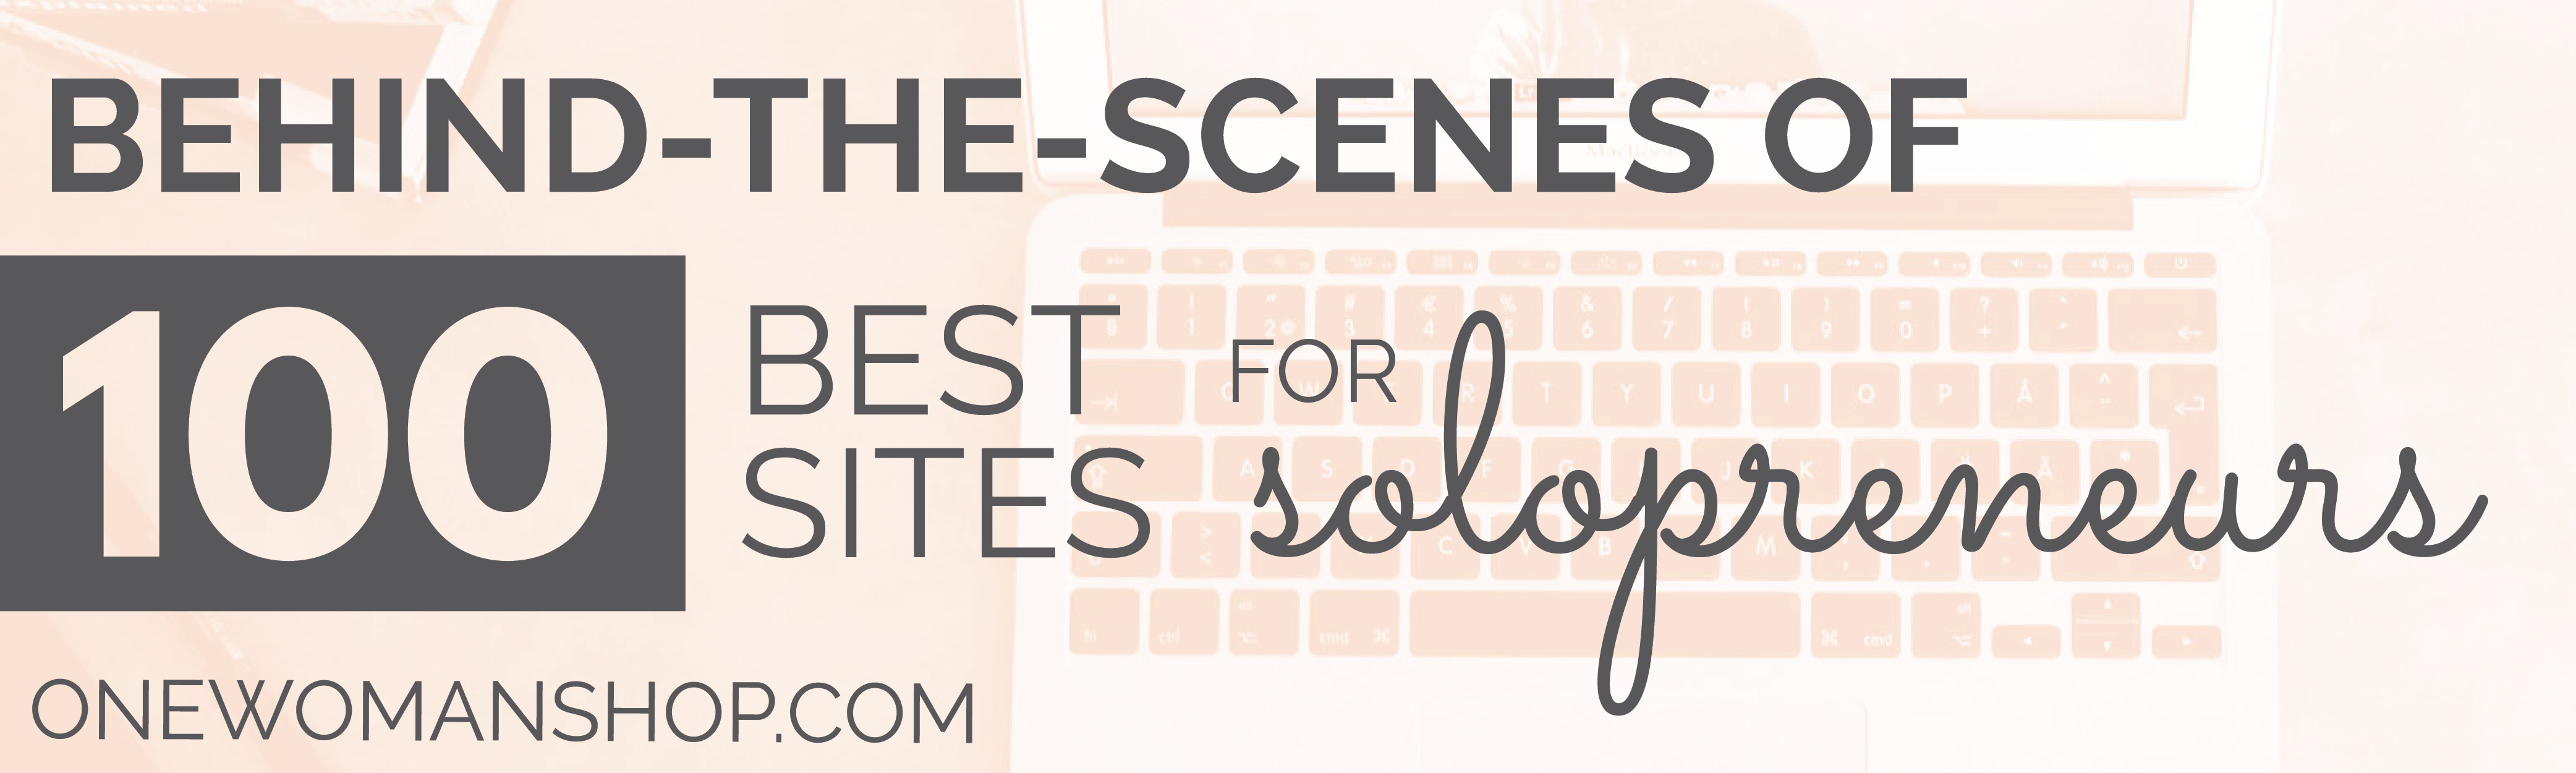 behind the scenes of 100 best sites for solopreneurs